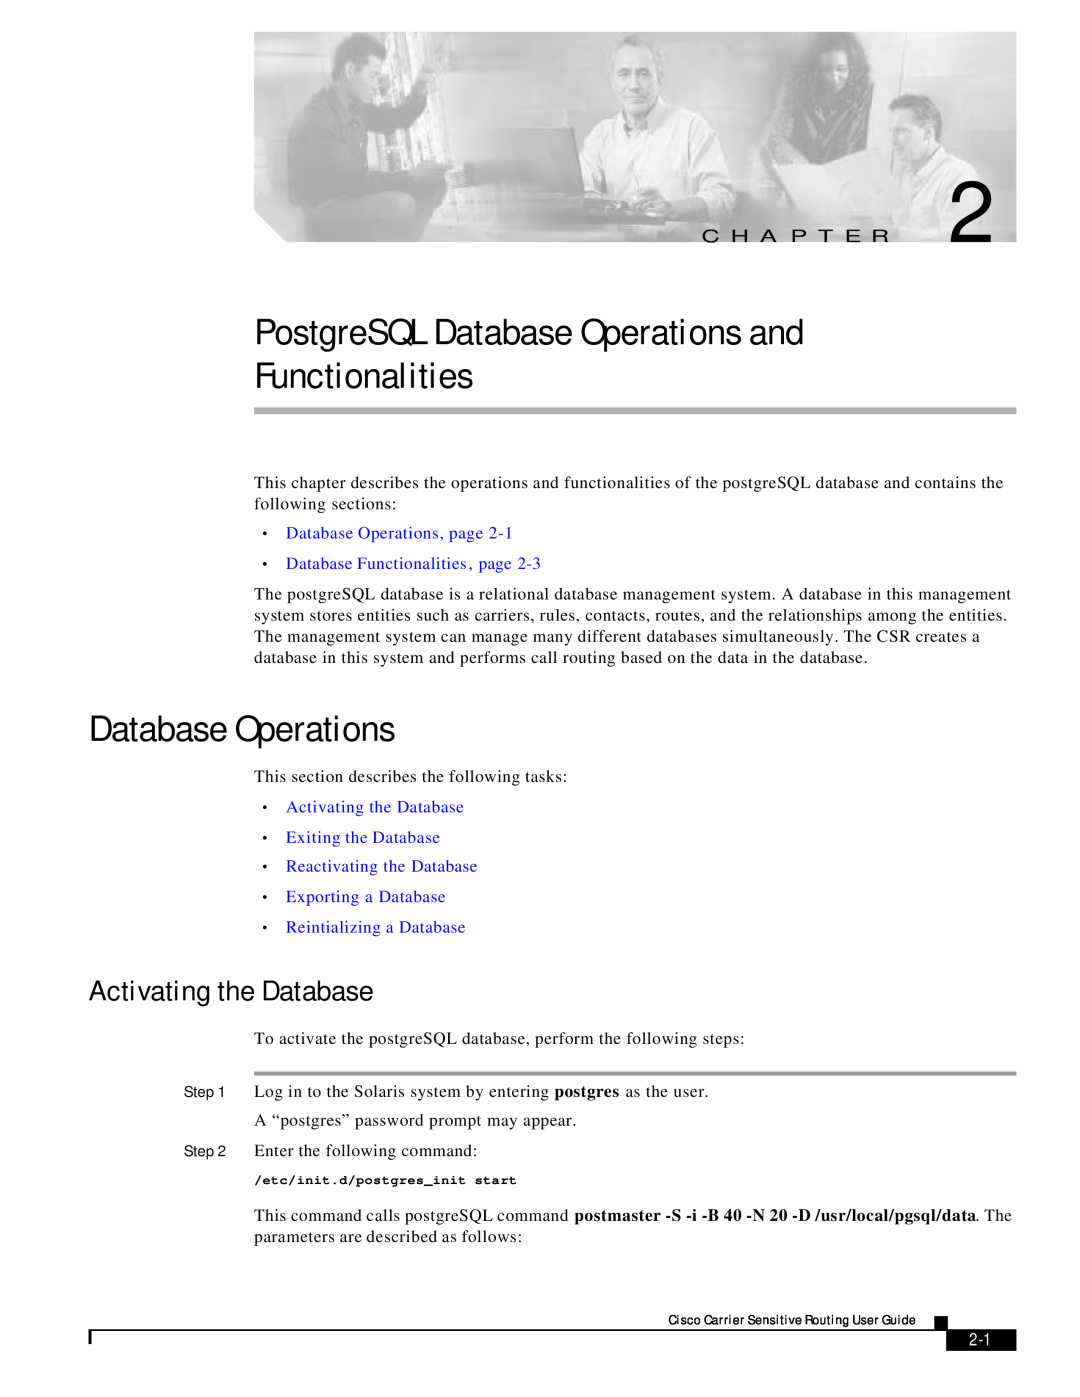 Cisco Systems Version 1.1 manual PostgreSQL Database Operations and Functionalities, Activating the Database 